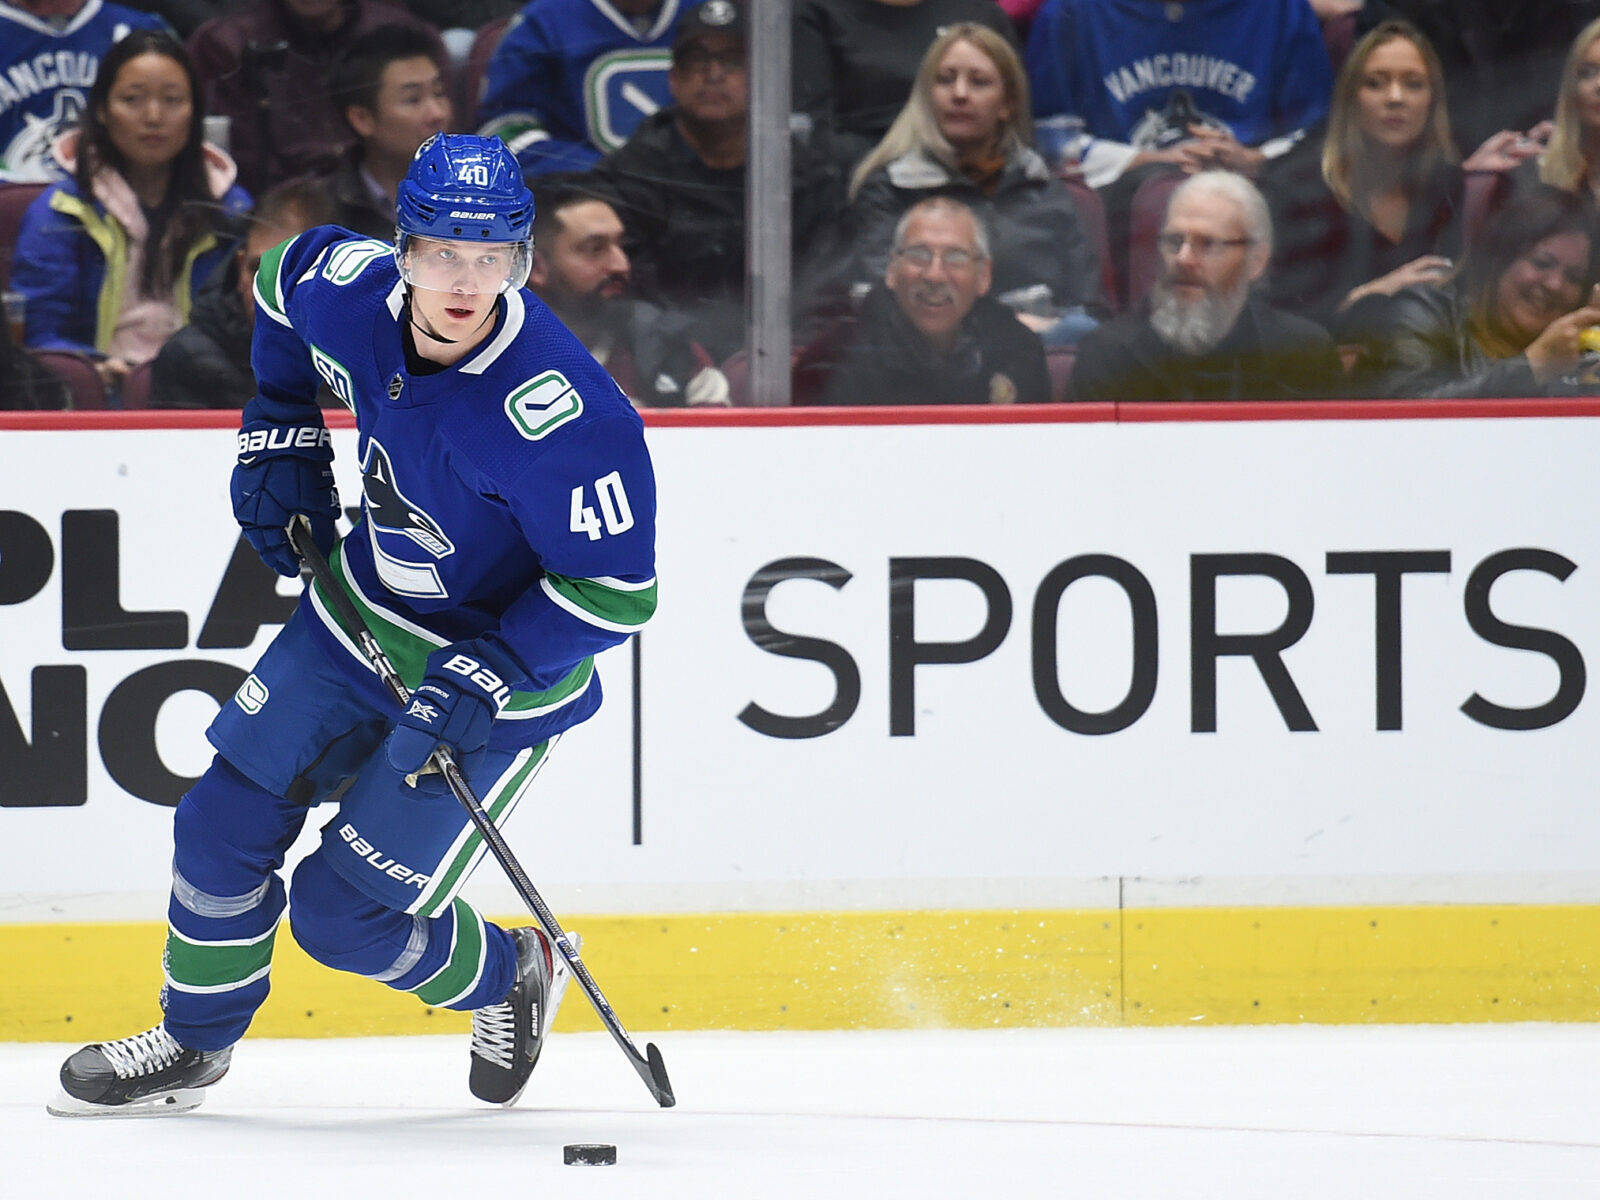 Canadian Nhl Player Elias Pettersson 2019 To 2020 Season Background